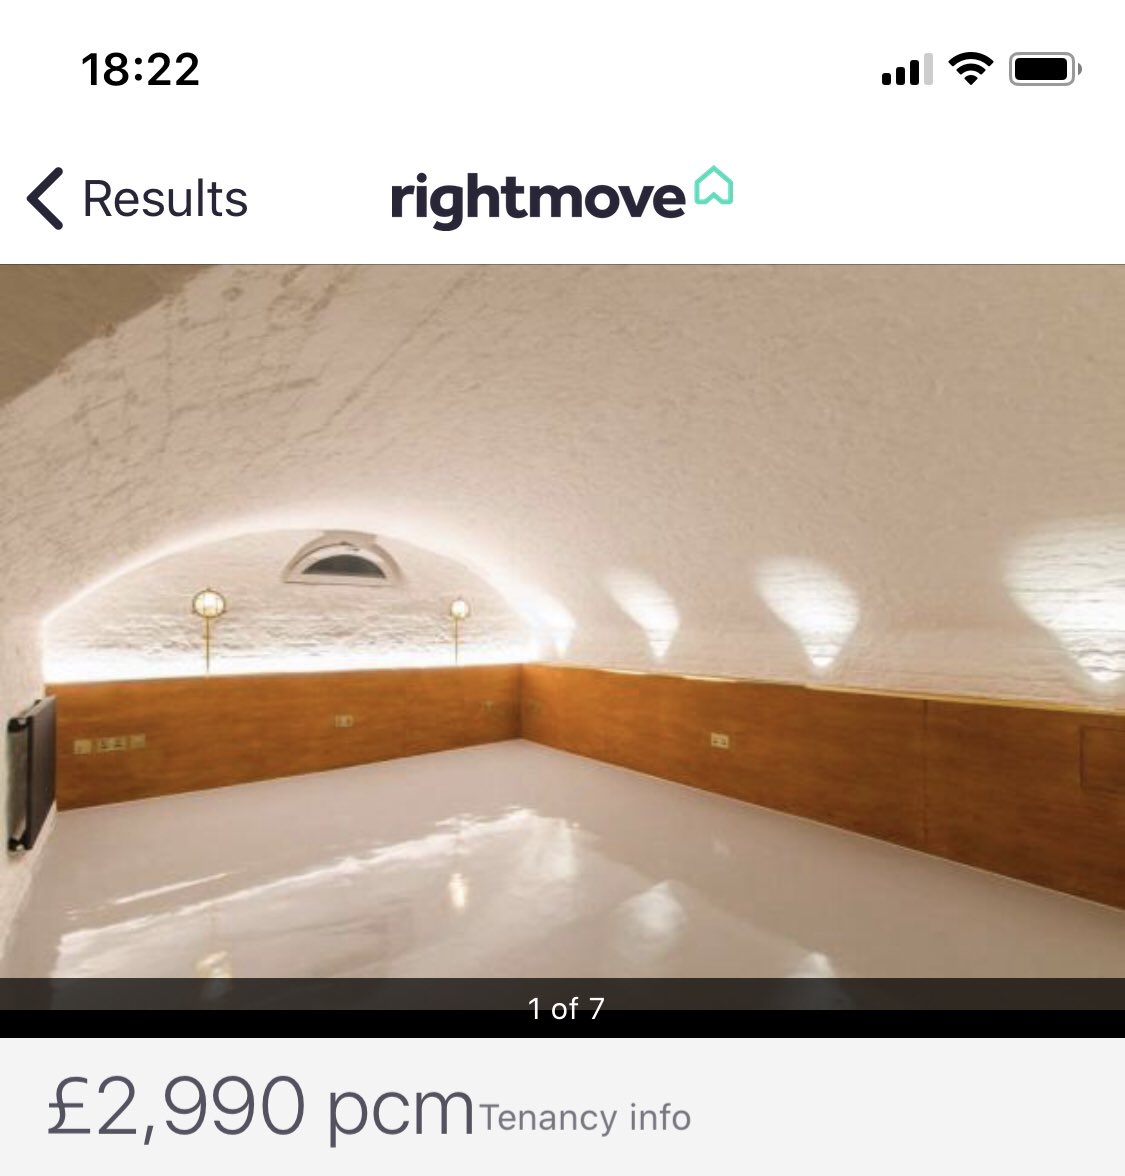 Ok, the London rental fun continues.  How about LIVING IN AN ACTUAL F-ING DUNGEON CITY CAVE no windows and all for 3k? At least the floor is polished & there are no carpets. How is this real life even?